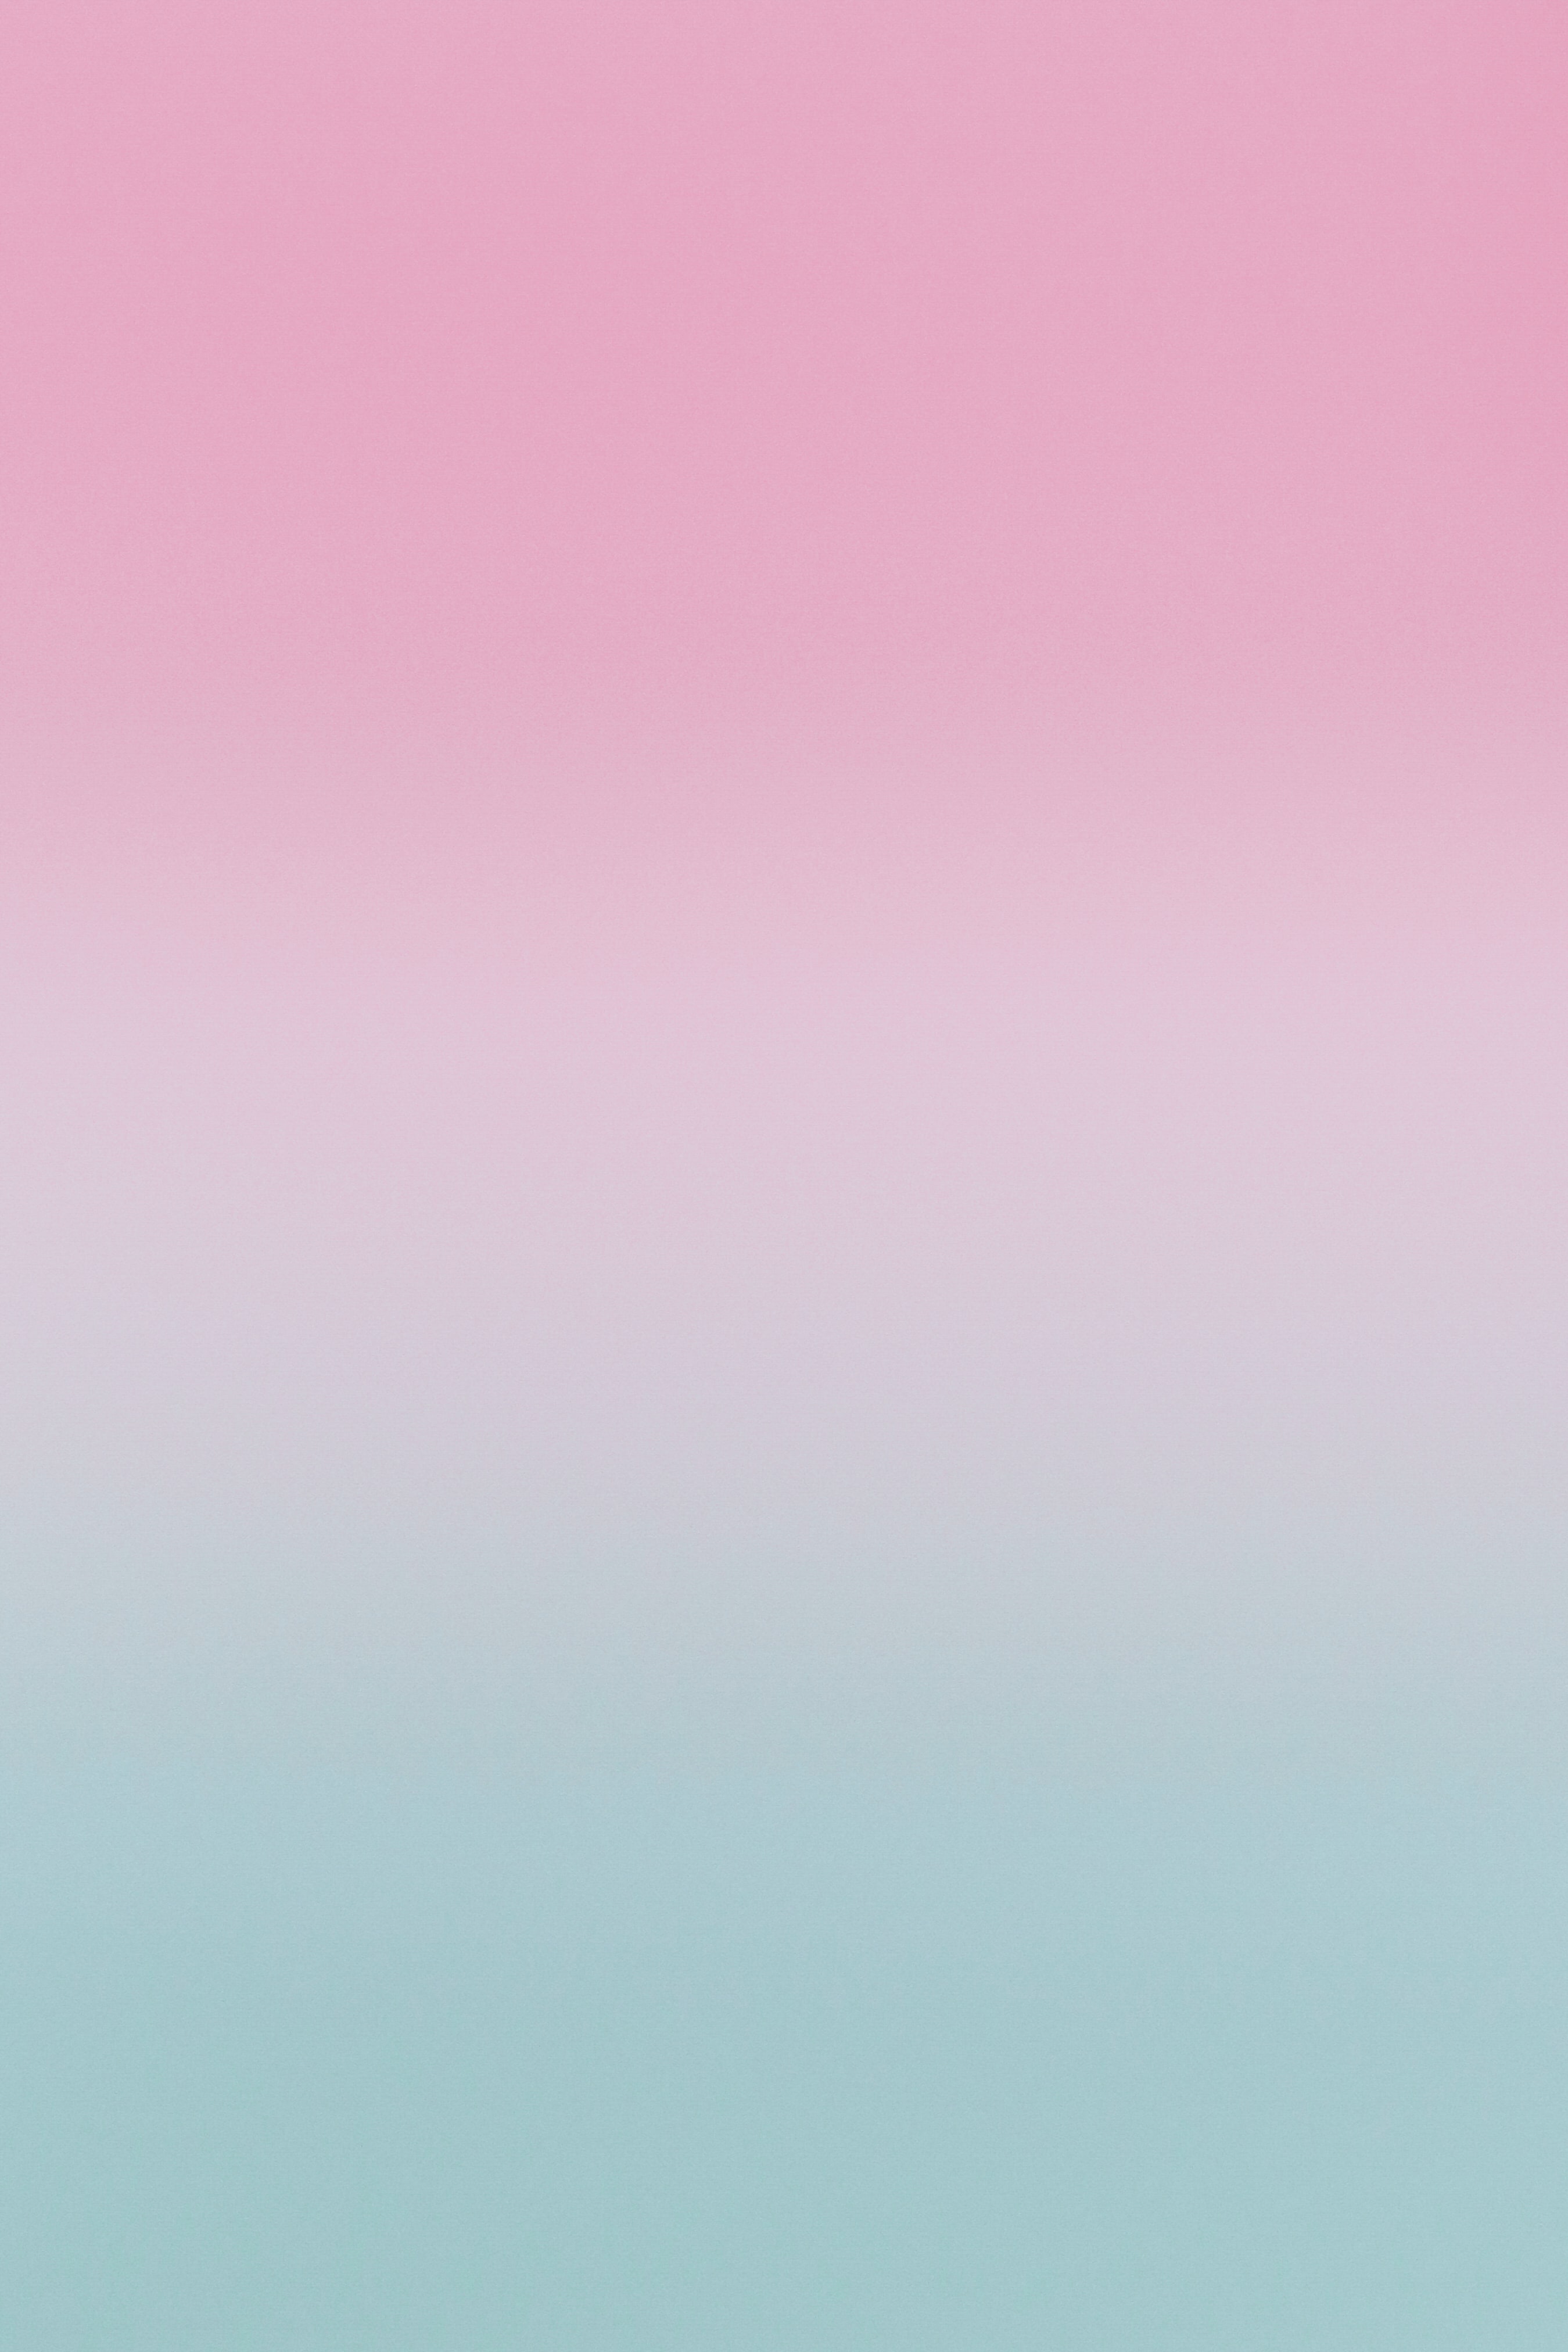 pink, gradient, blue, abstract, blur, smooth